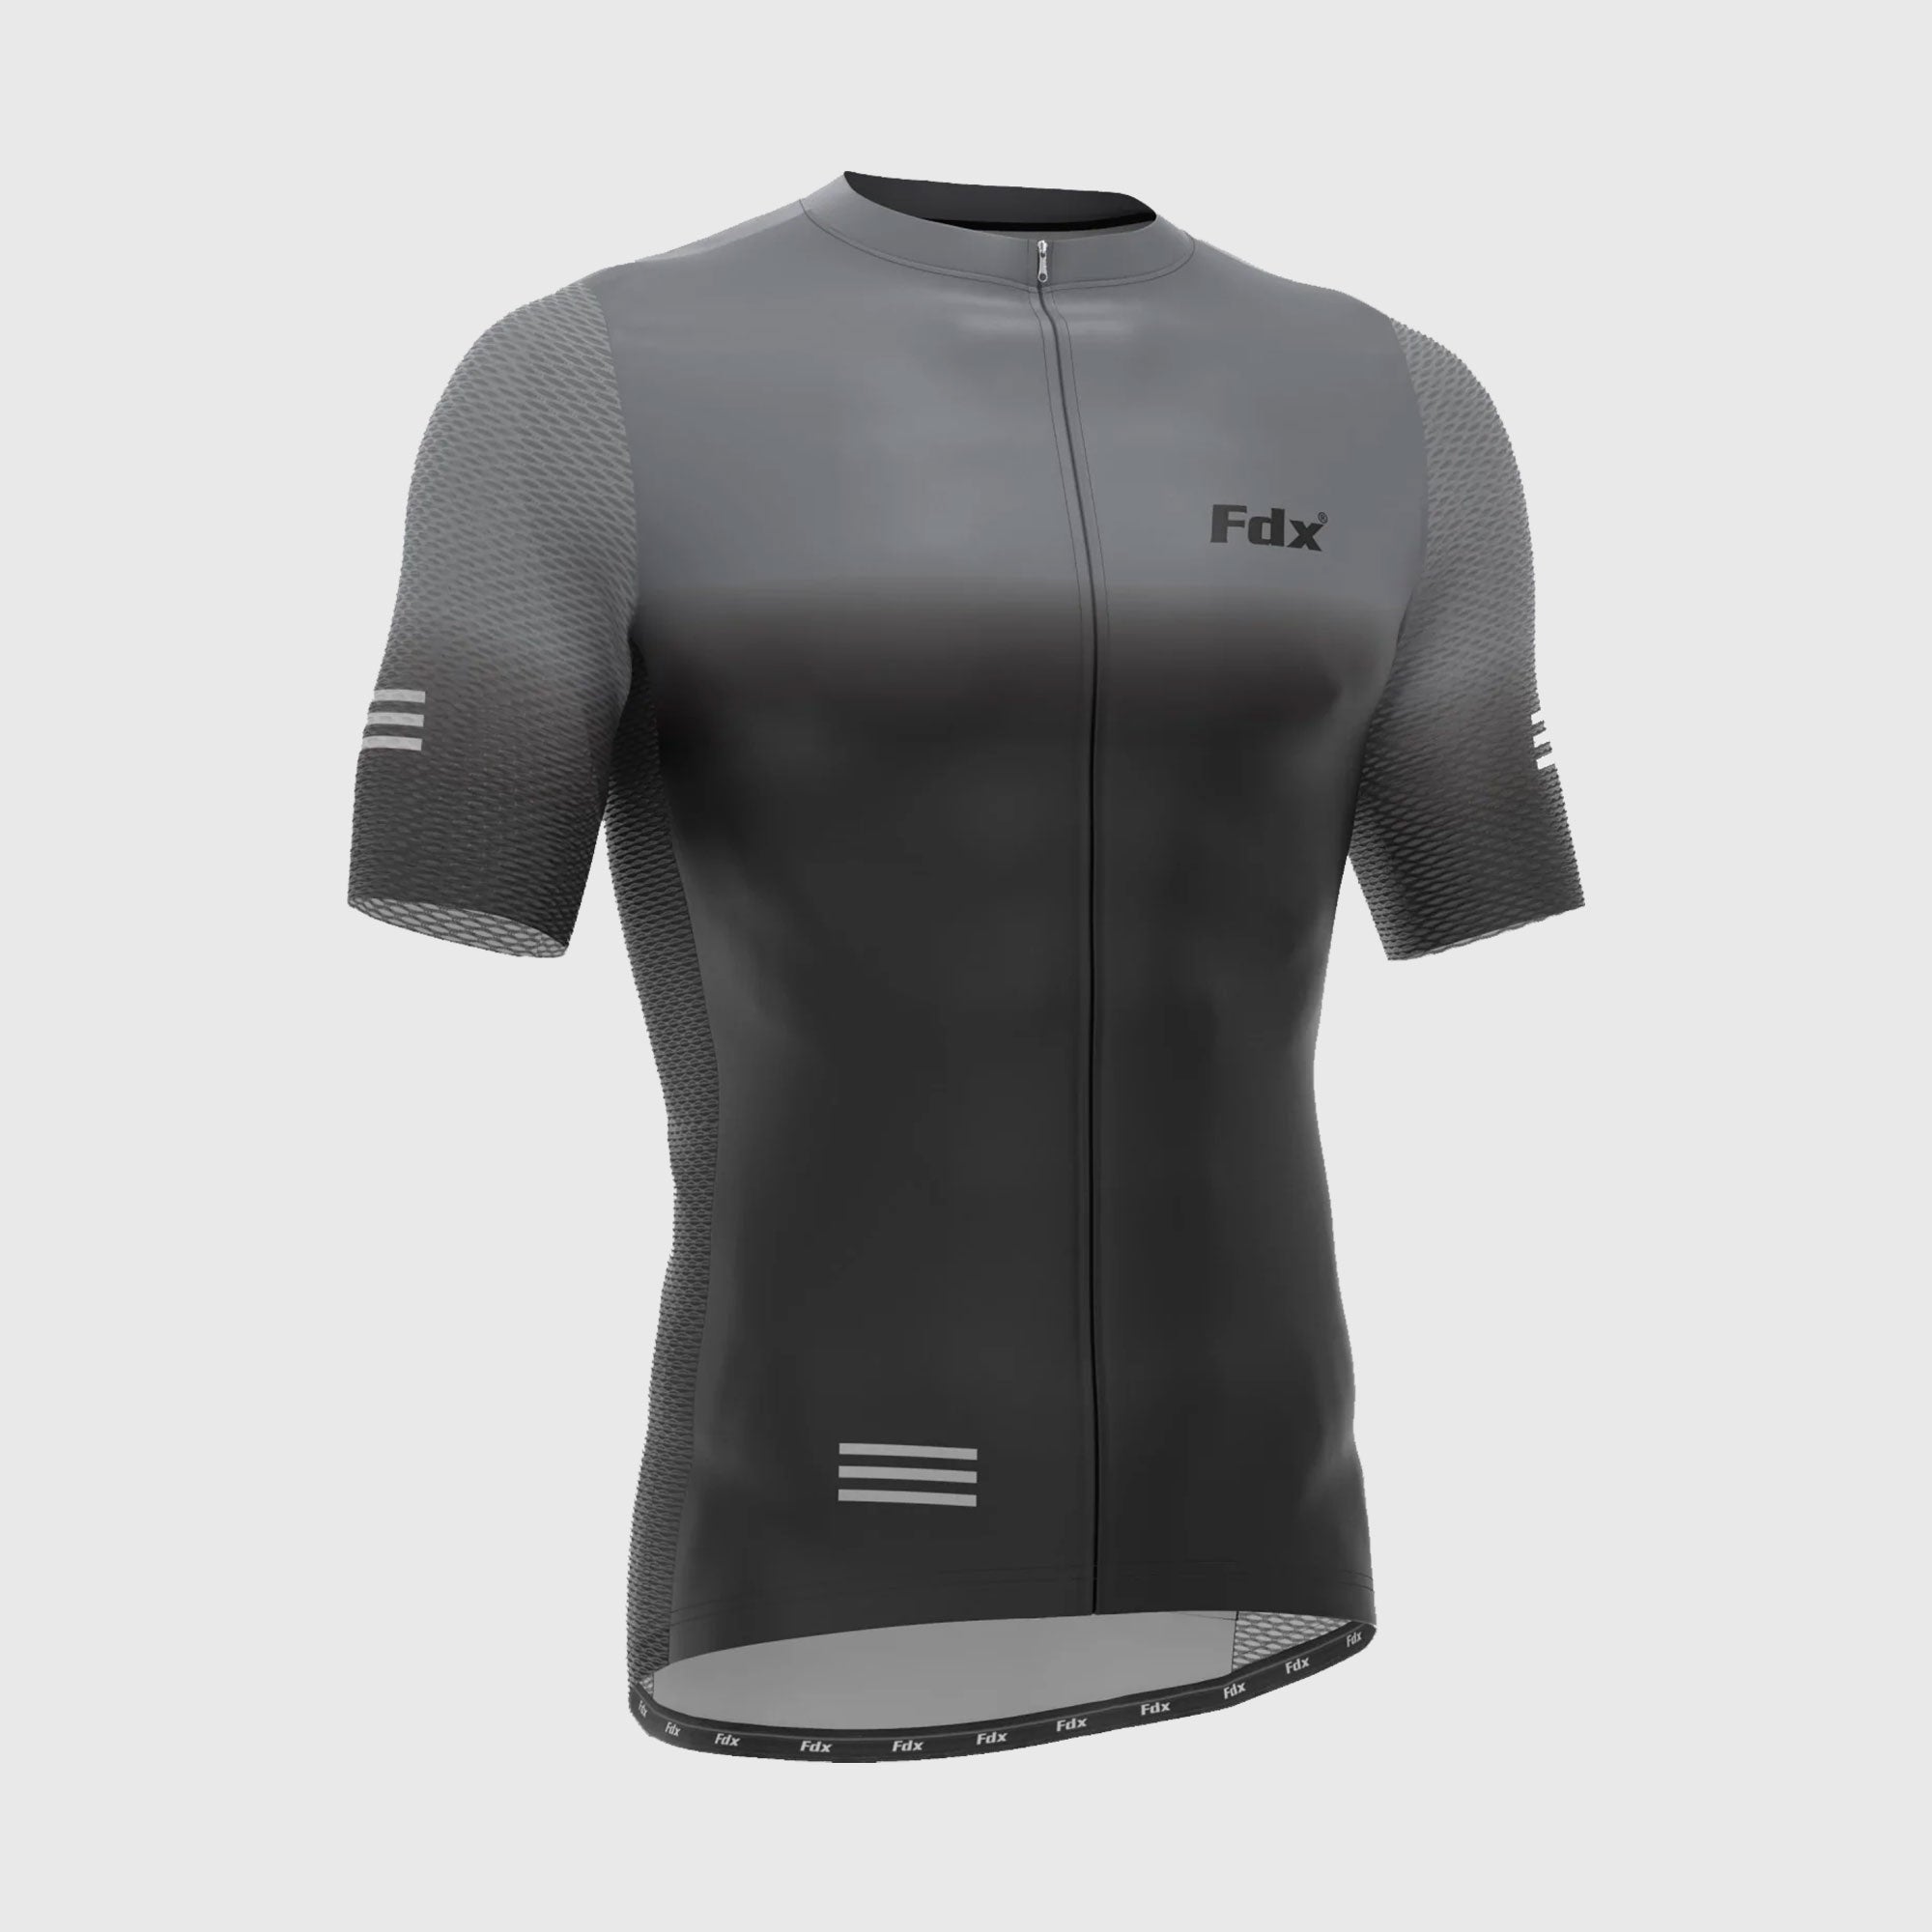 Men’s Black and Grey Fdx best short sleeves cycling jersey indoor & outdoor Hi-Viz Reflective breathable summer lightweight biking top, skin friendly Hi-Viz Reflective half sleeves cycling mesh shirt for riding with pockets